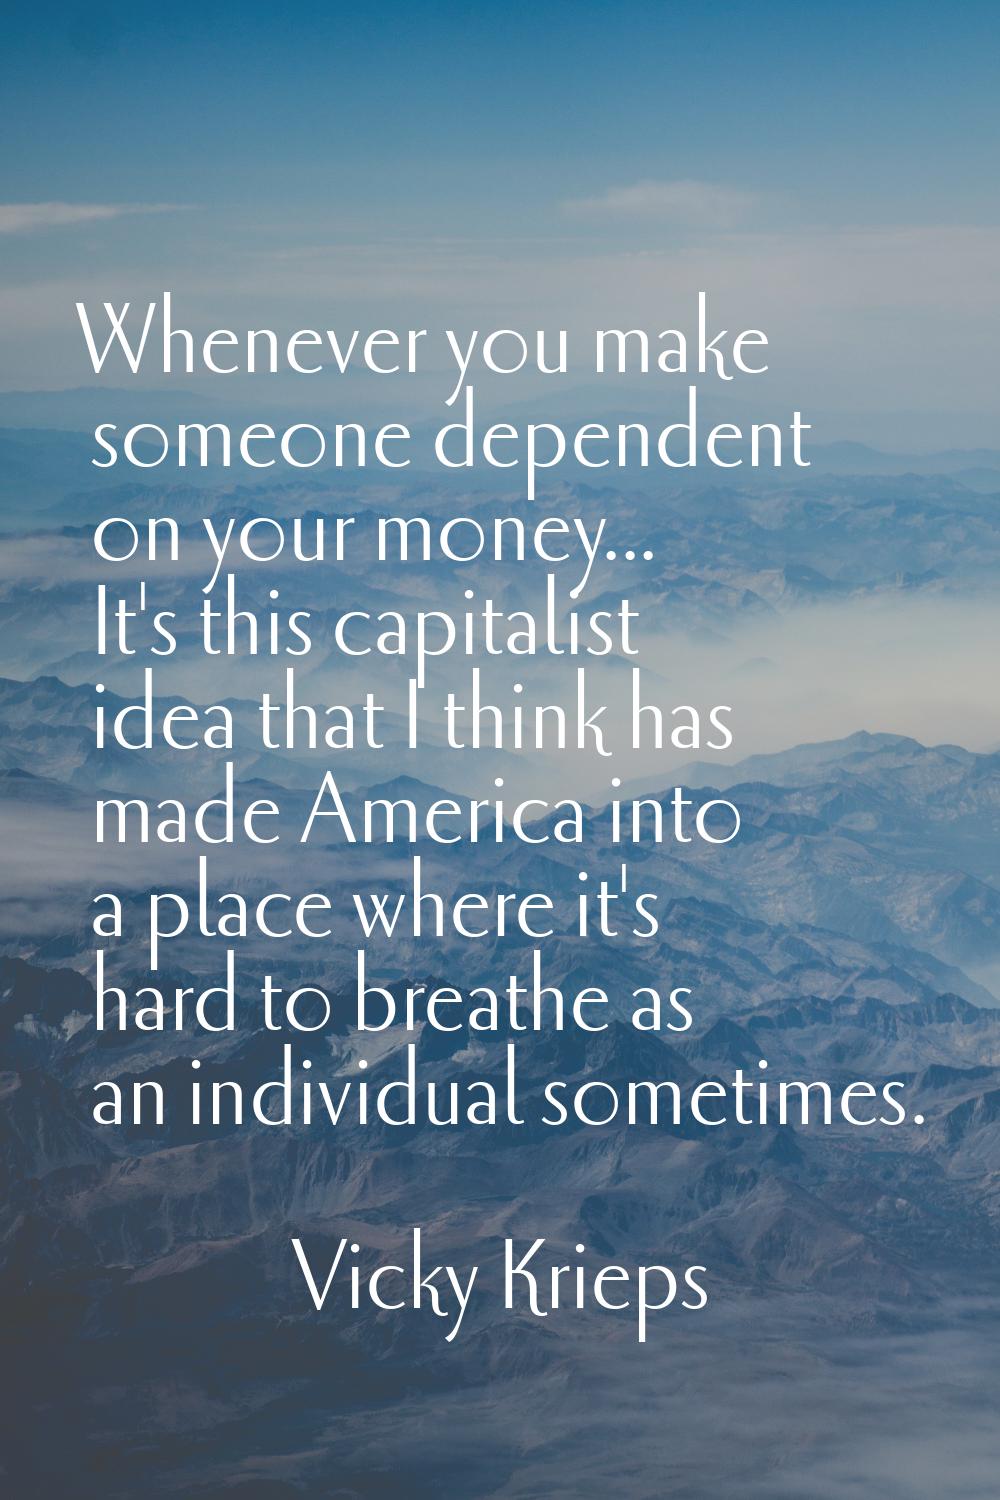 Whenever you make someone dependent on your money... It's this capitalist idea that I think has mad